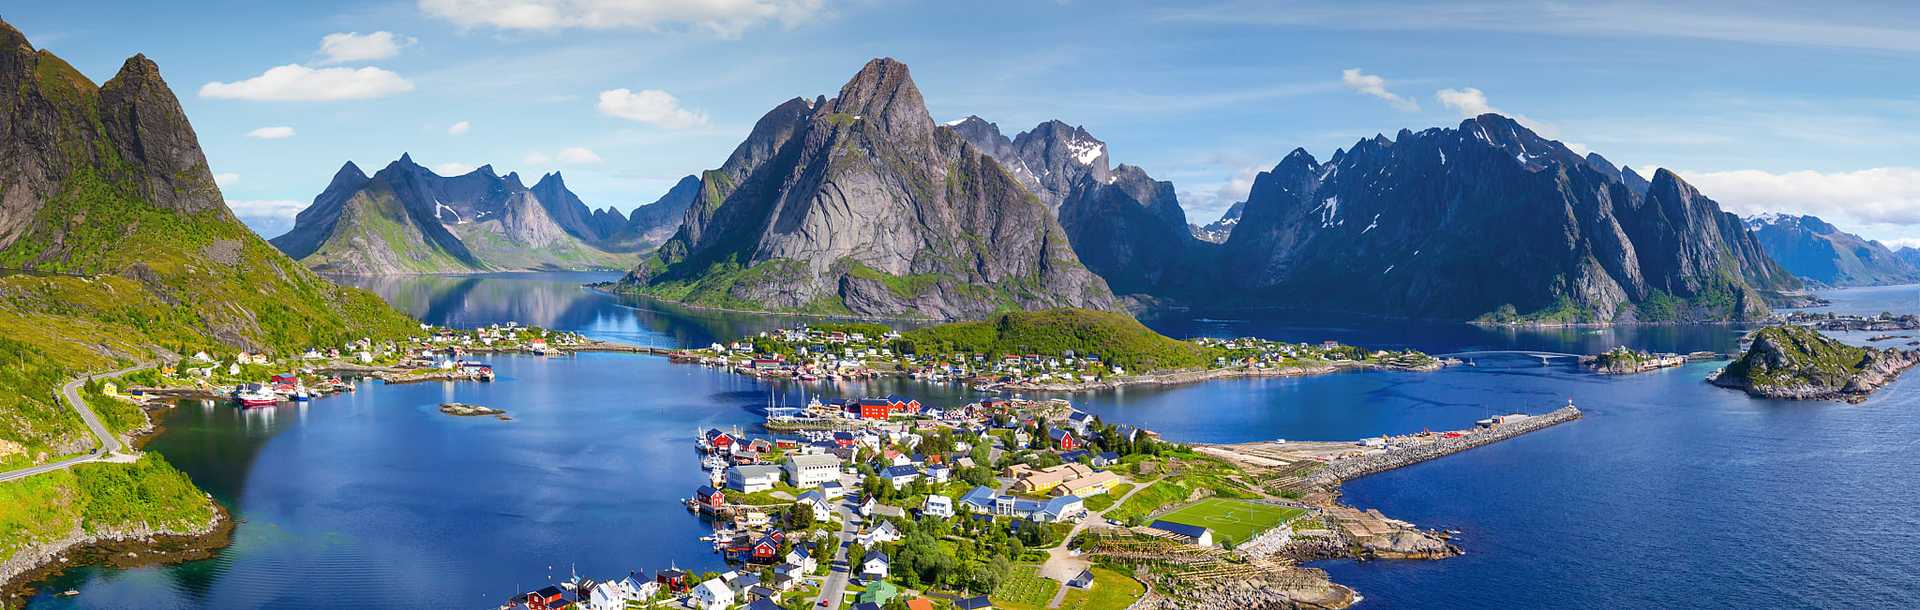 The village of Reine, Norway, under a sunny blue sky with the typical rorbu houses.